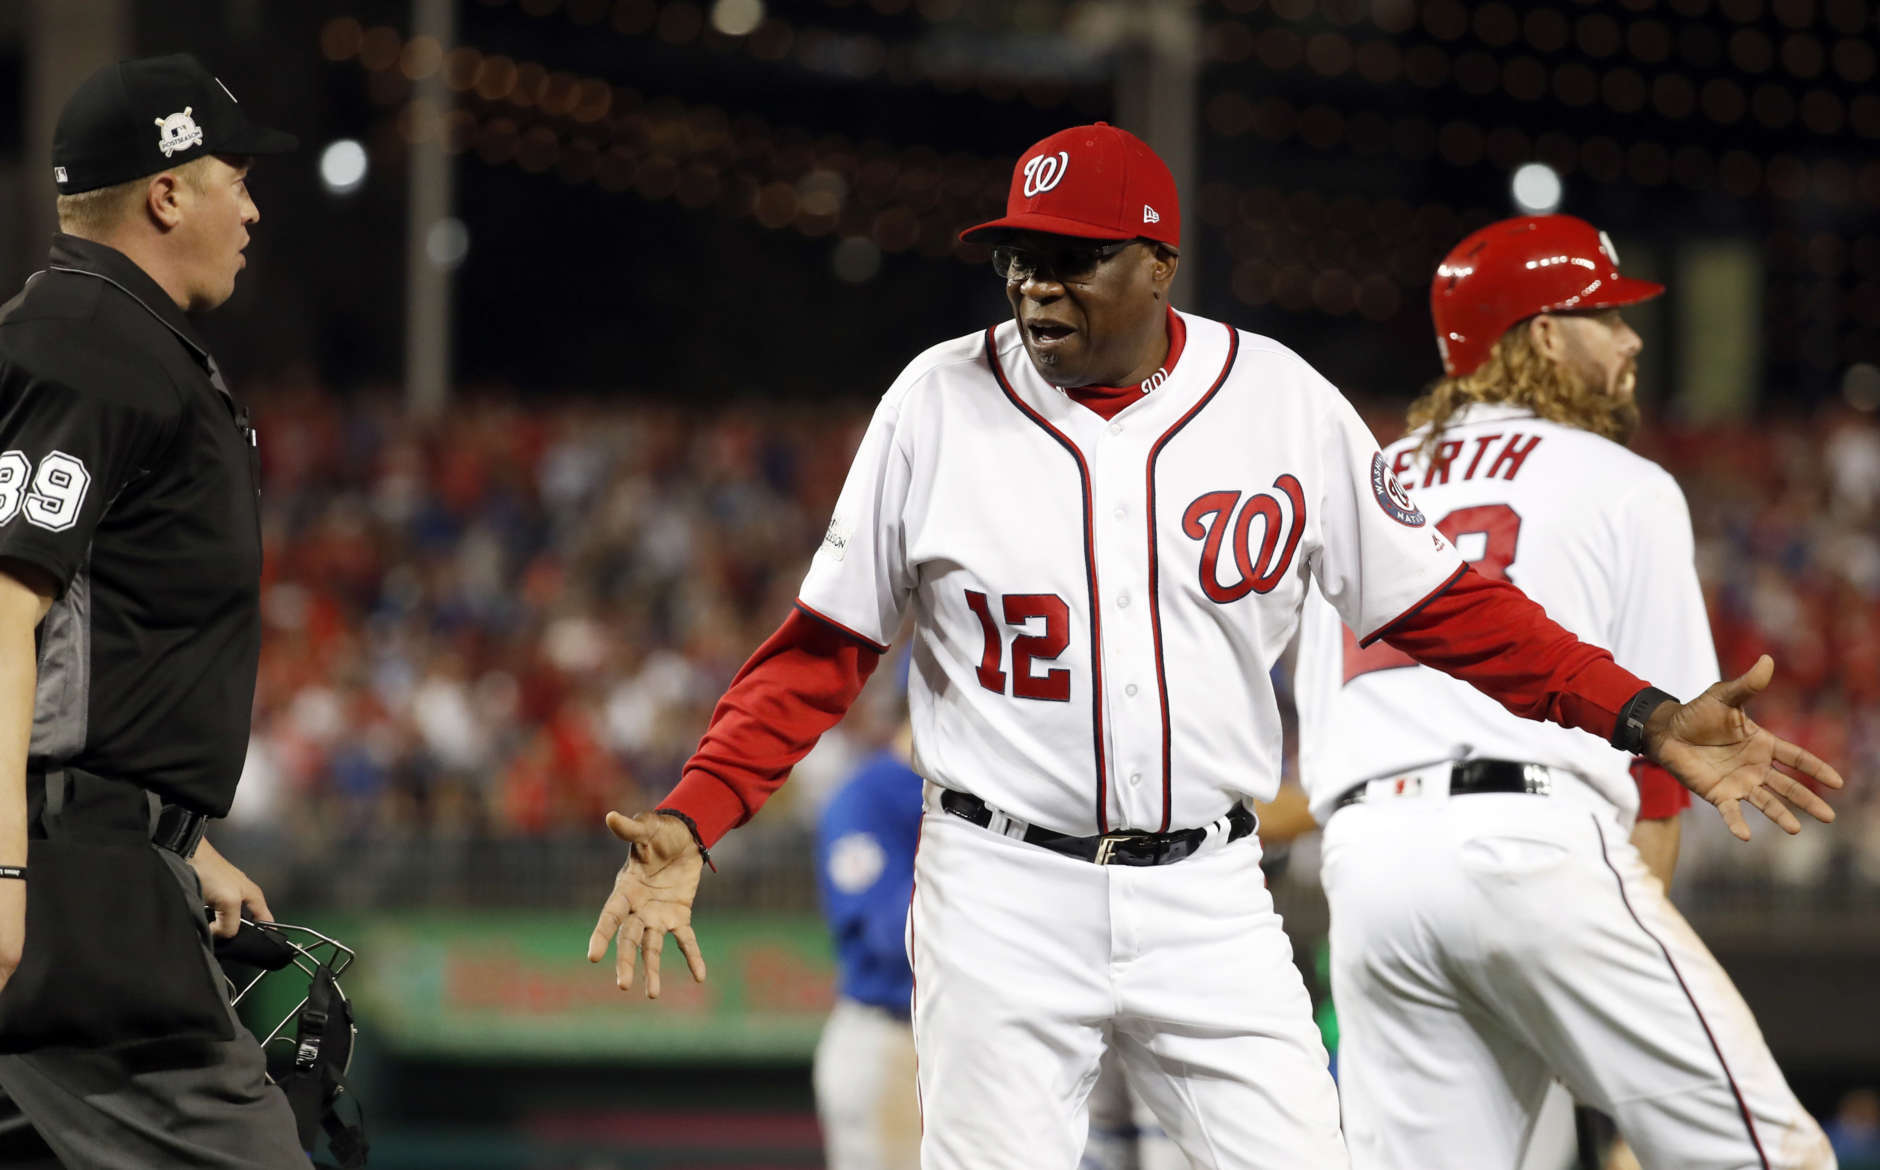 Dusty Baker's ouster raises a question: Do the Nationals have a